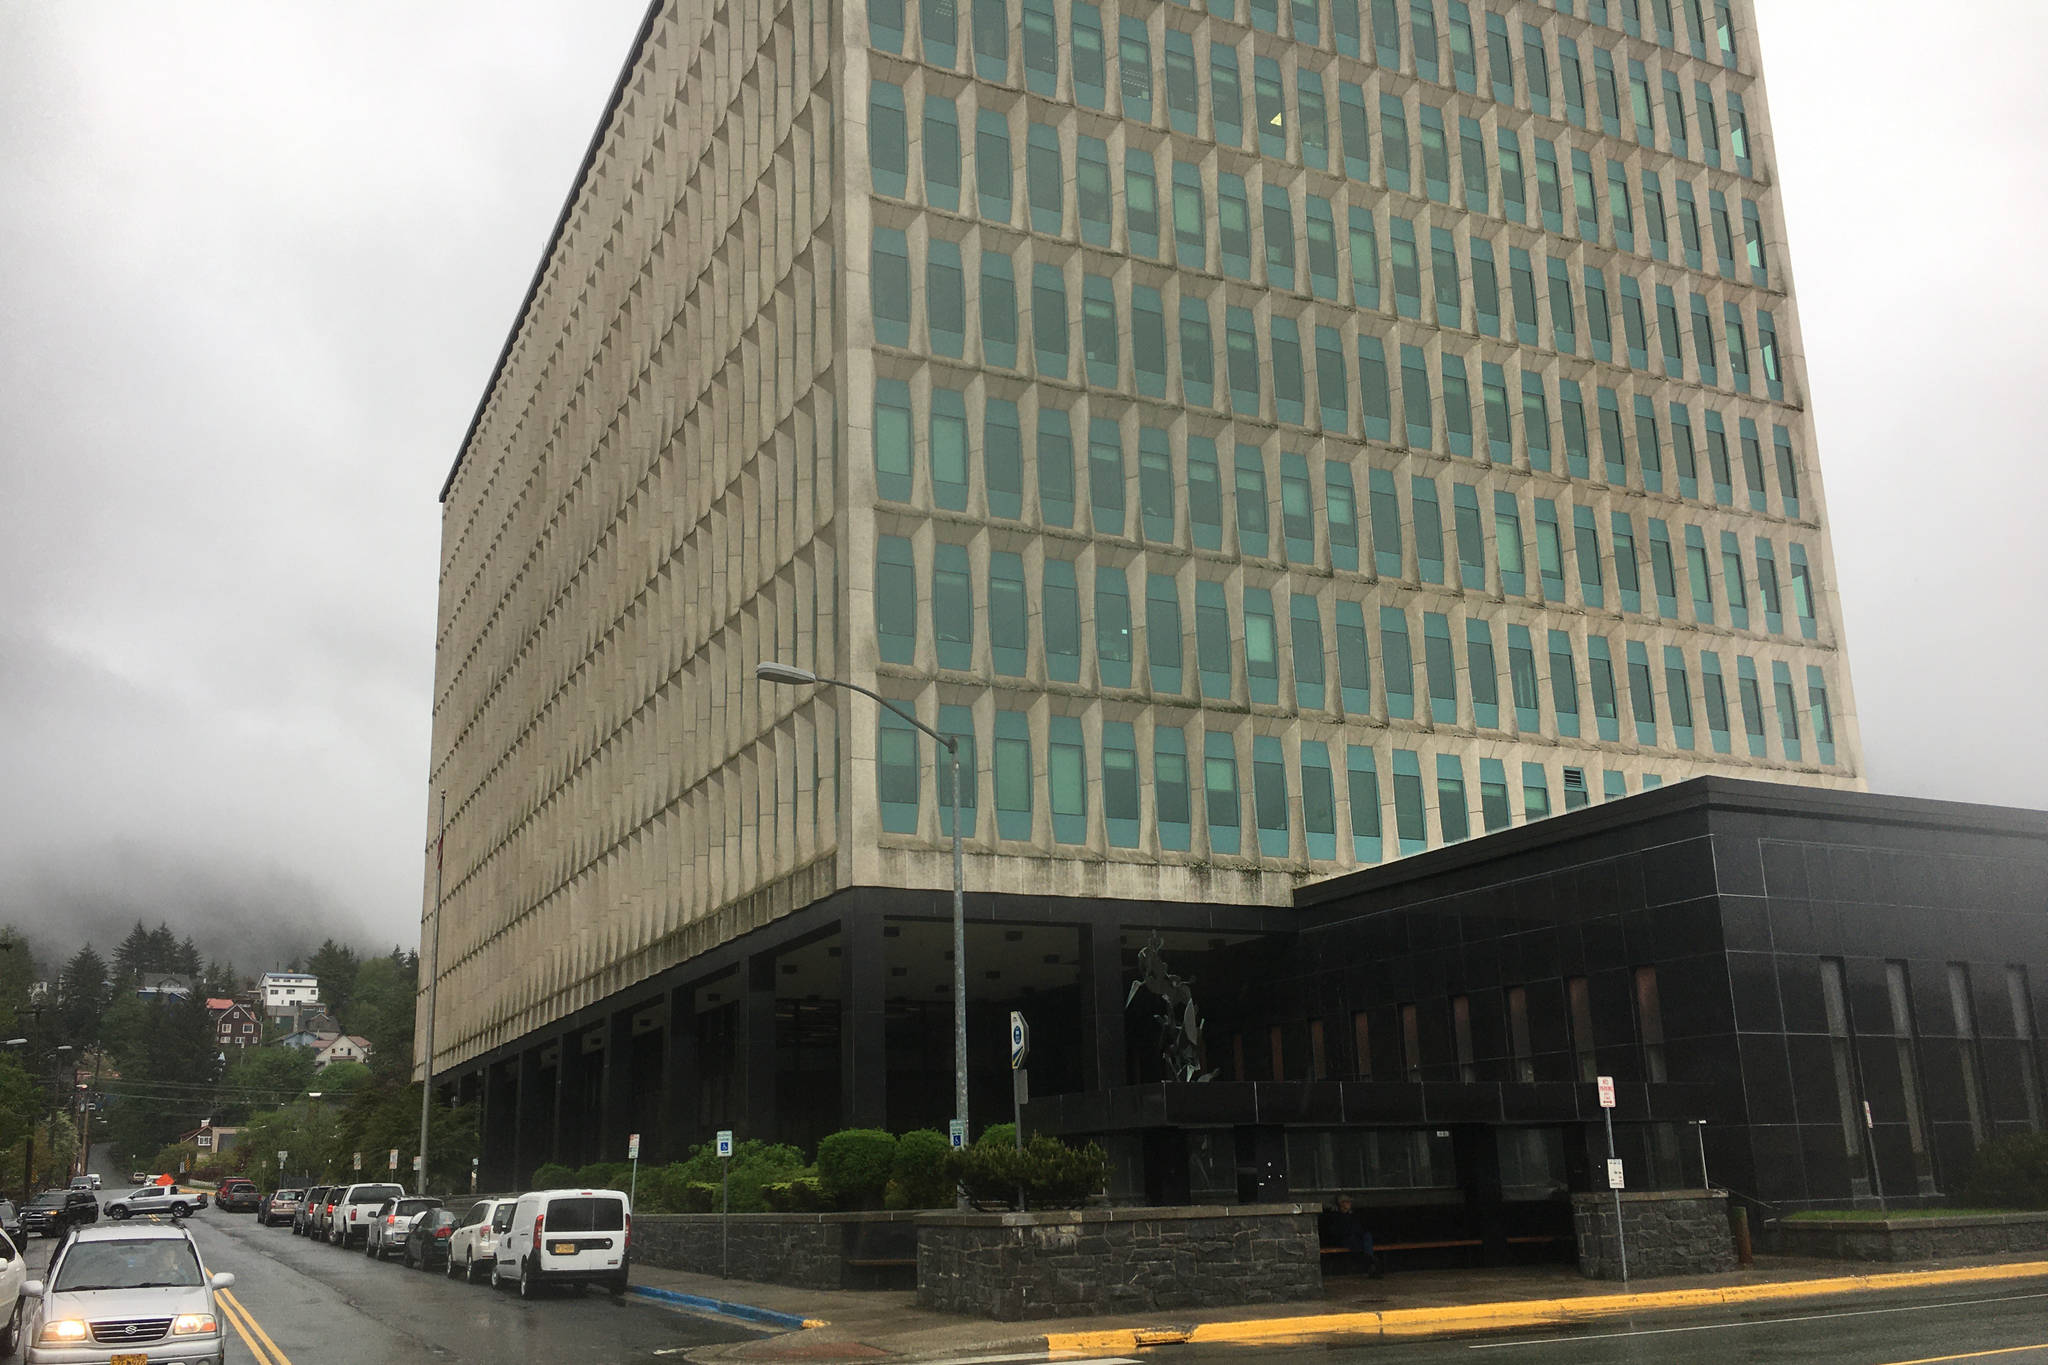 A Utah man who pleaded guilty to killing his wife is being sentenced in United States District Court at the Hurff A. Saunders Federal Building, seen here on June 2, 2021. (Michael S. Lockett / Juneau Empire)